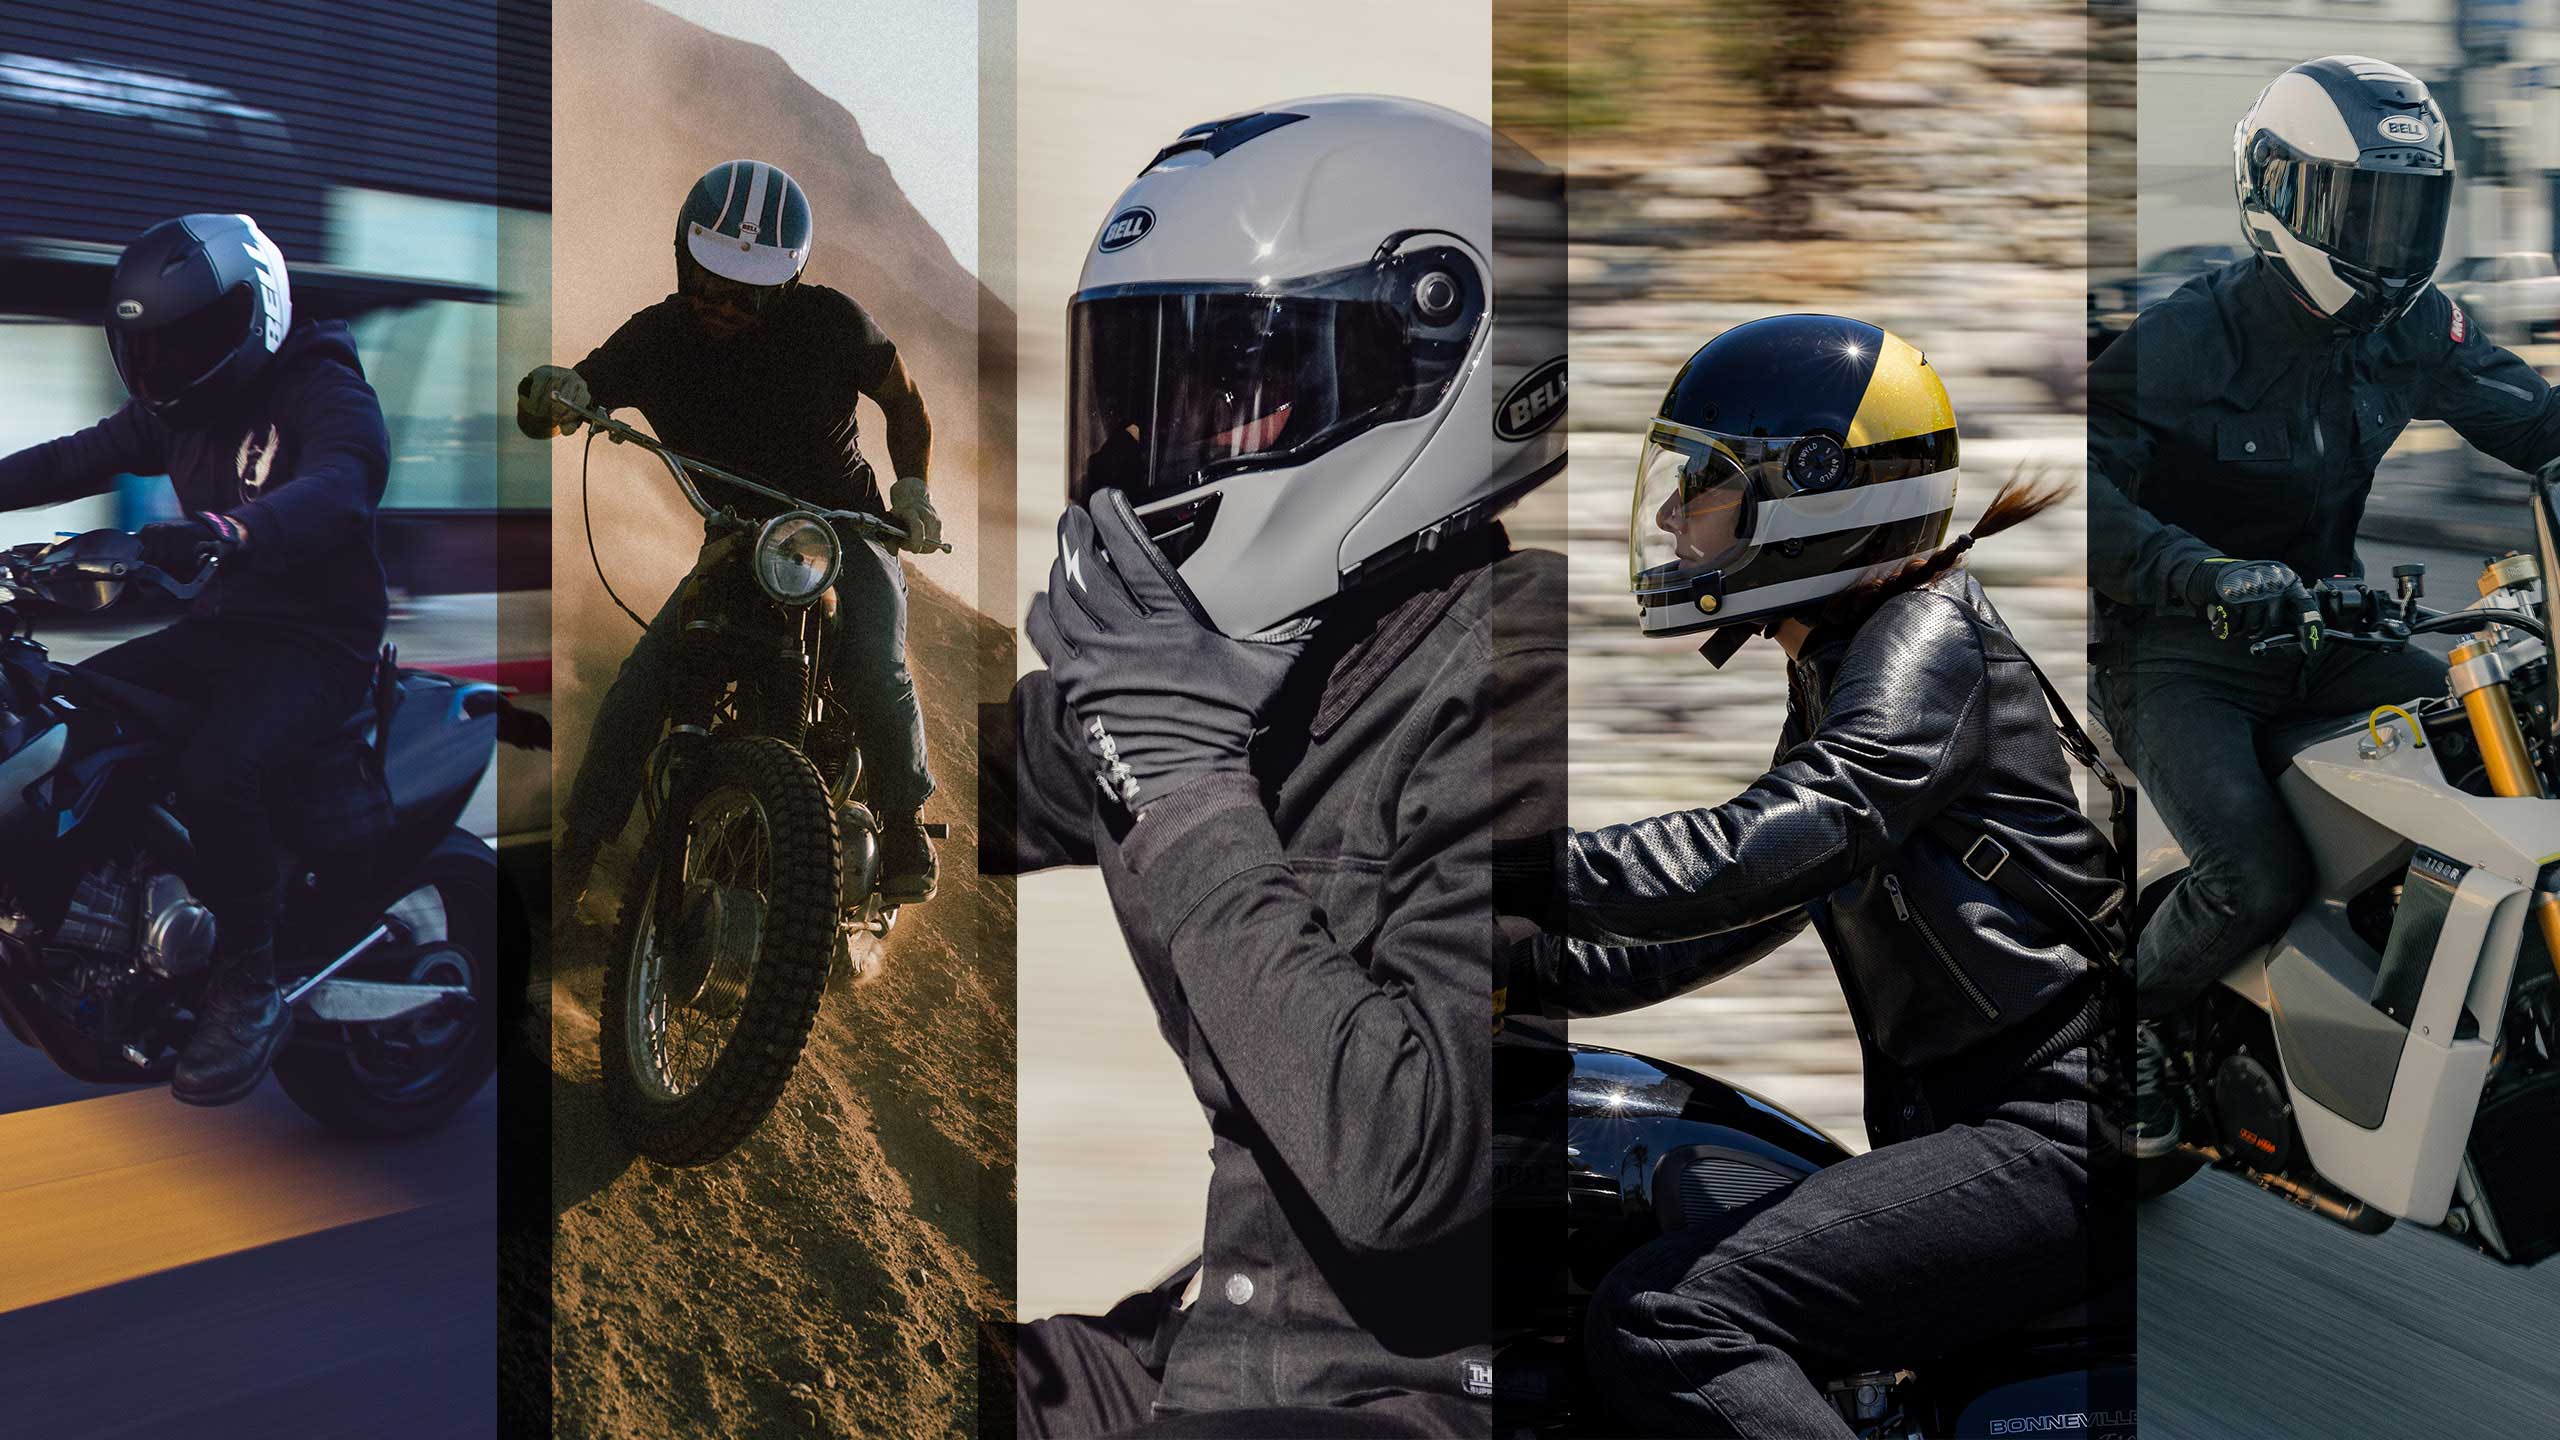 Our Top 5 Motorcycle Helmets